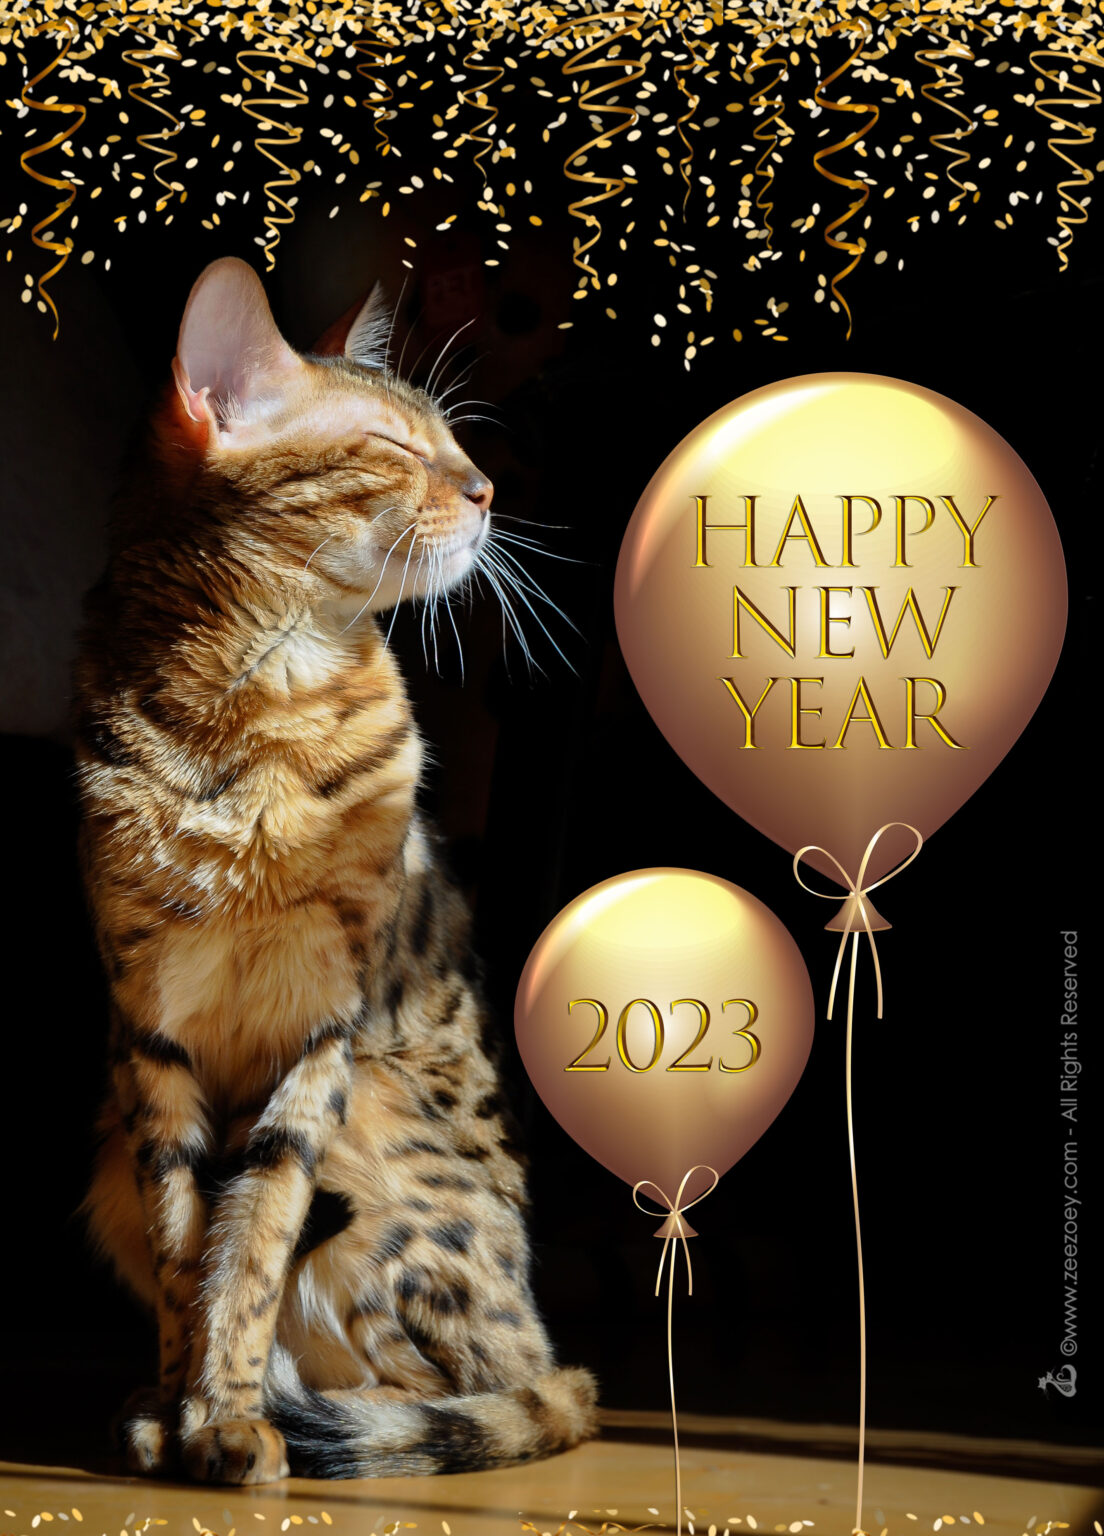 Happy New Year 2023 from Zee & Zoey’s Cat Chronicles